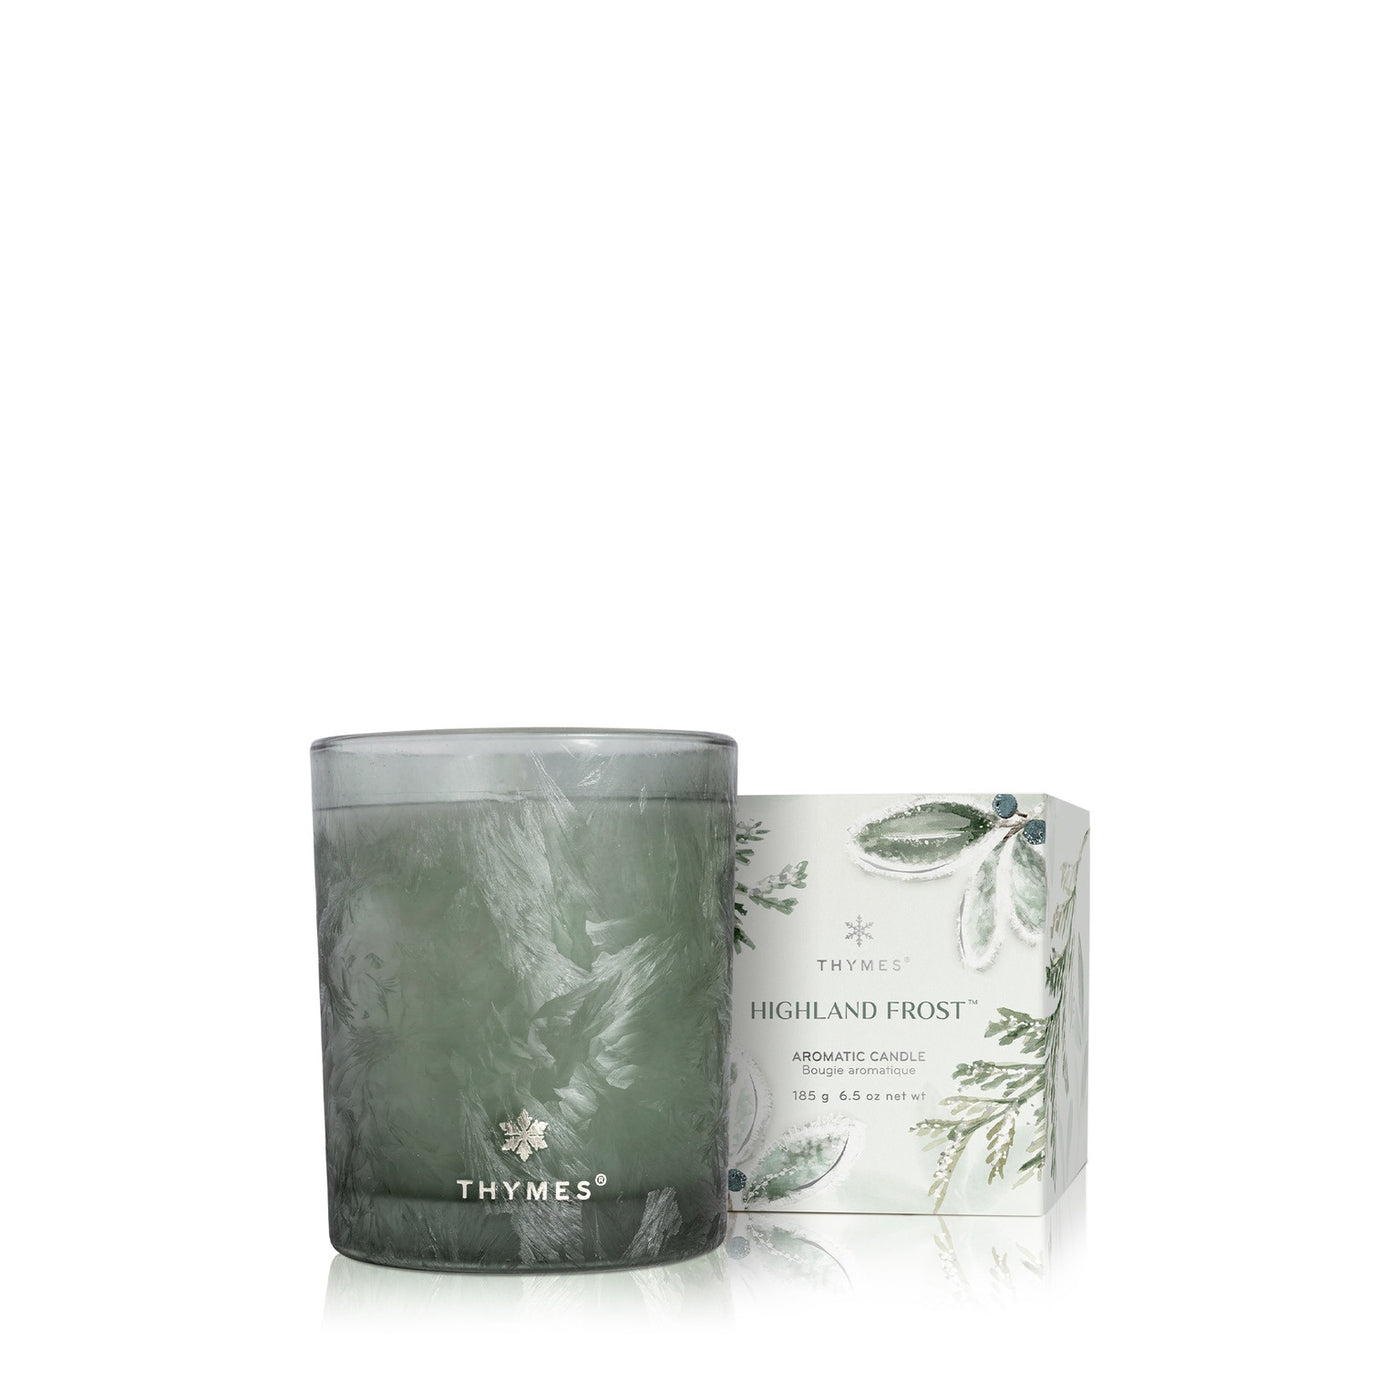 Highland Frost Poured Candle